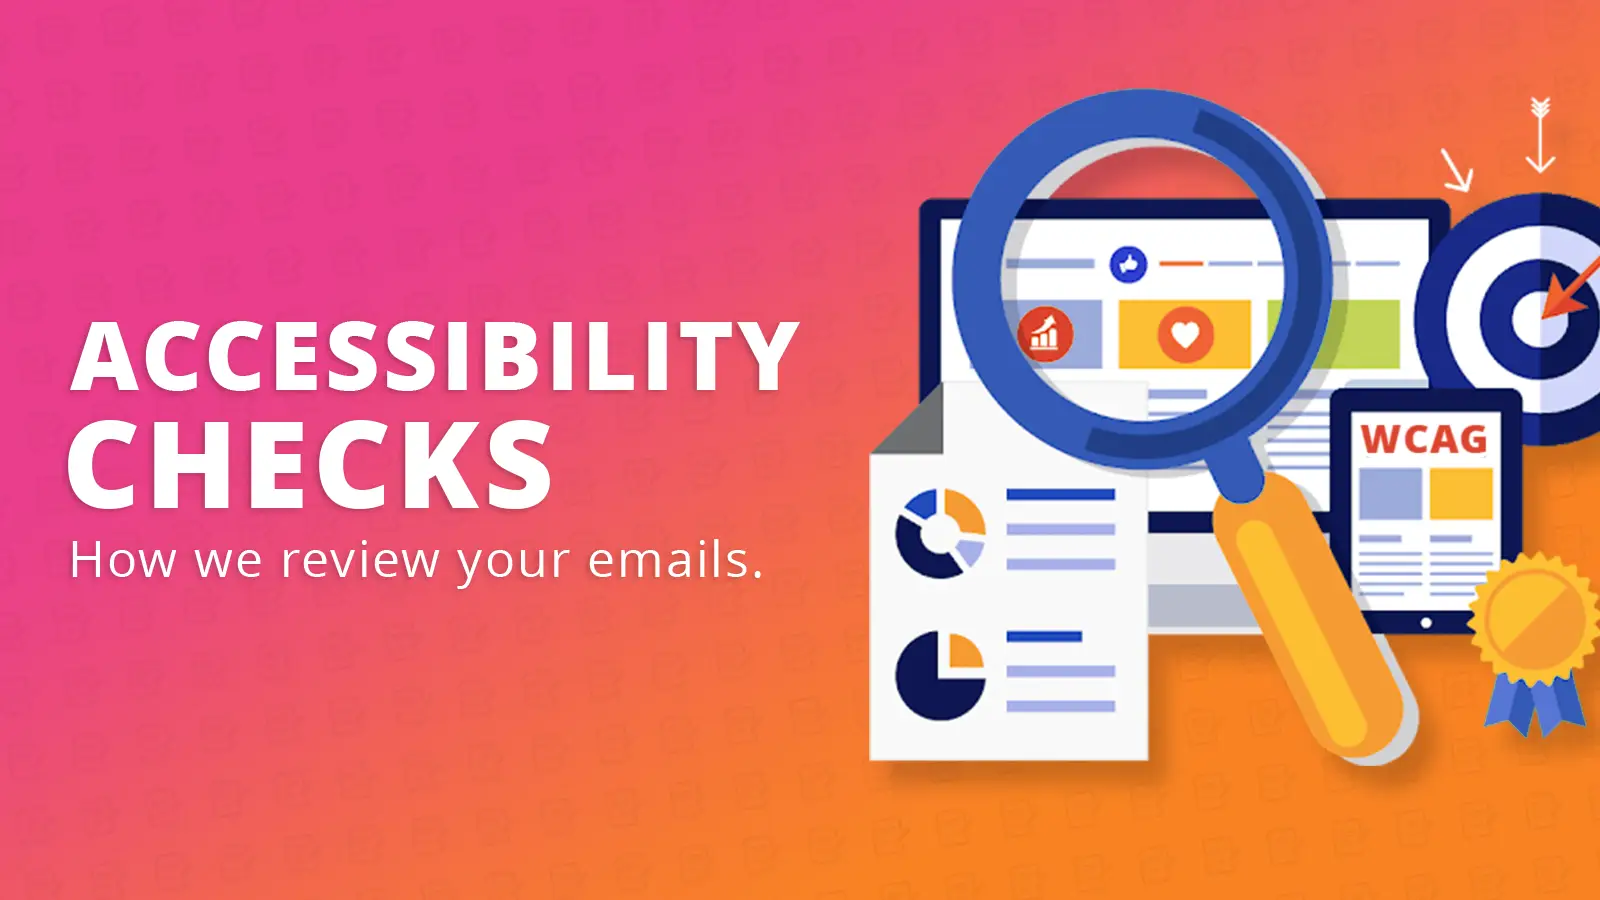 Accessibility checks: How we review your emails